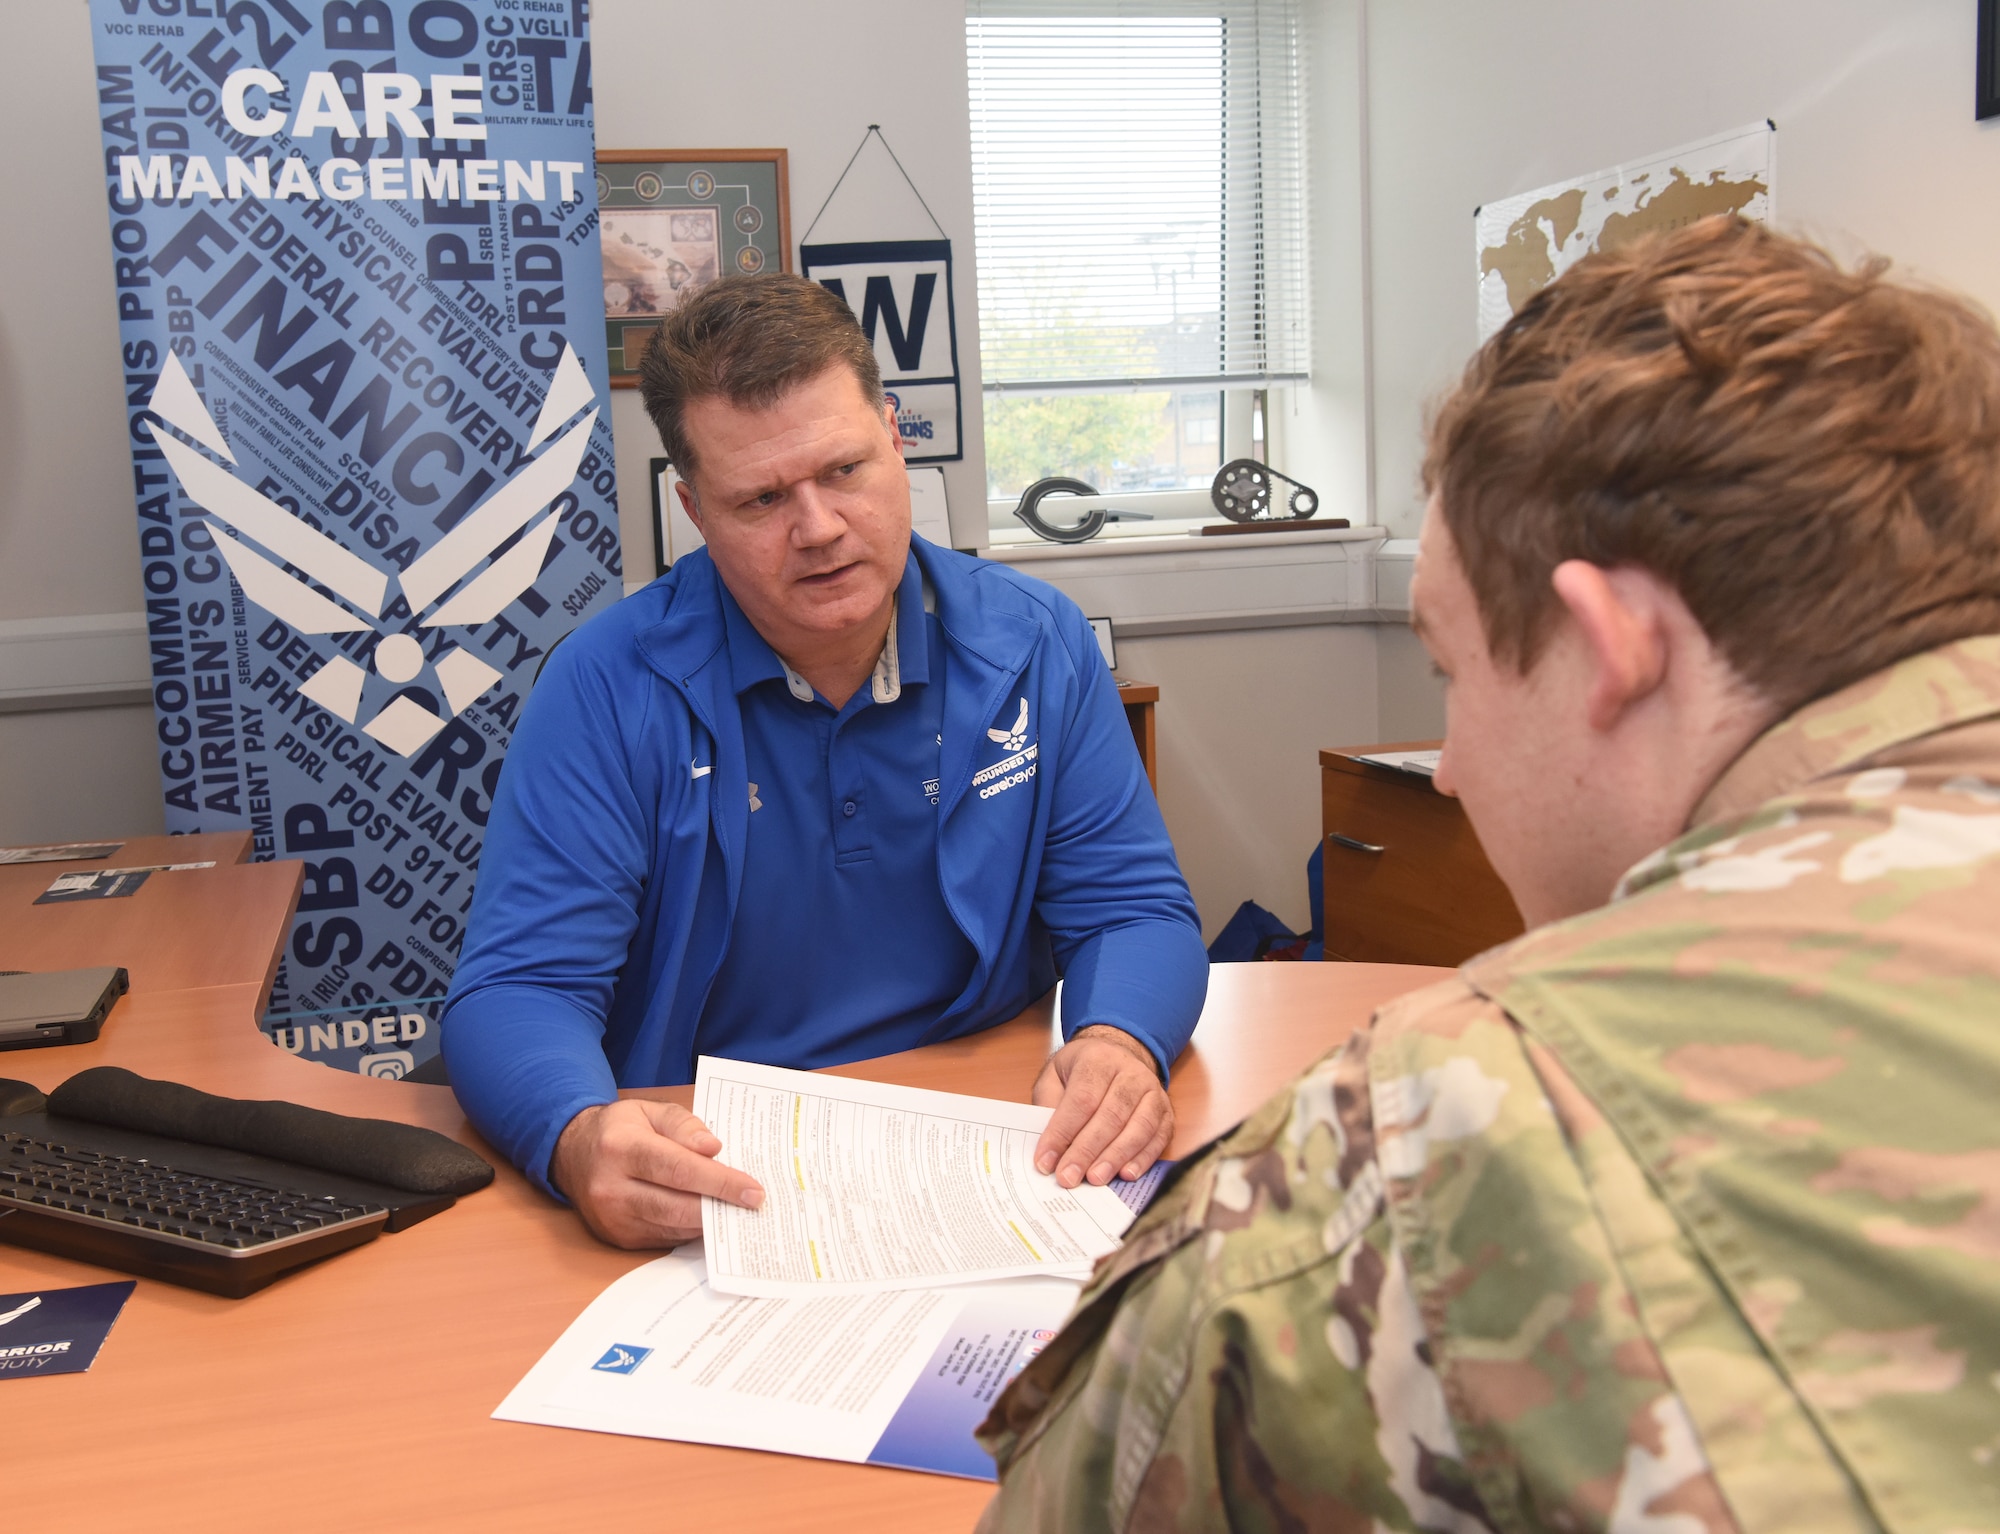 Beau Jones, left, 48th Medical Group Air Force Wounded Warrior Program recovery care coordinator, explains the medical evaluation board process to an Airman at Royal Air Force Lakenheath, England, Nov. 7, 2022. Jones is a retired senior master sergeant with 26 years active-duty service, and former first sergeant for seven squadrons during his 10 years stationed at RAF Mildenhall. He now uses the experience, skills and knowledge he gained in the military and as a first sergeant to help Airmen facing difficult challenges. (U.S. Air Force photo by Karen Abeyasekere)